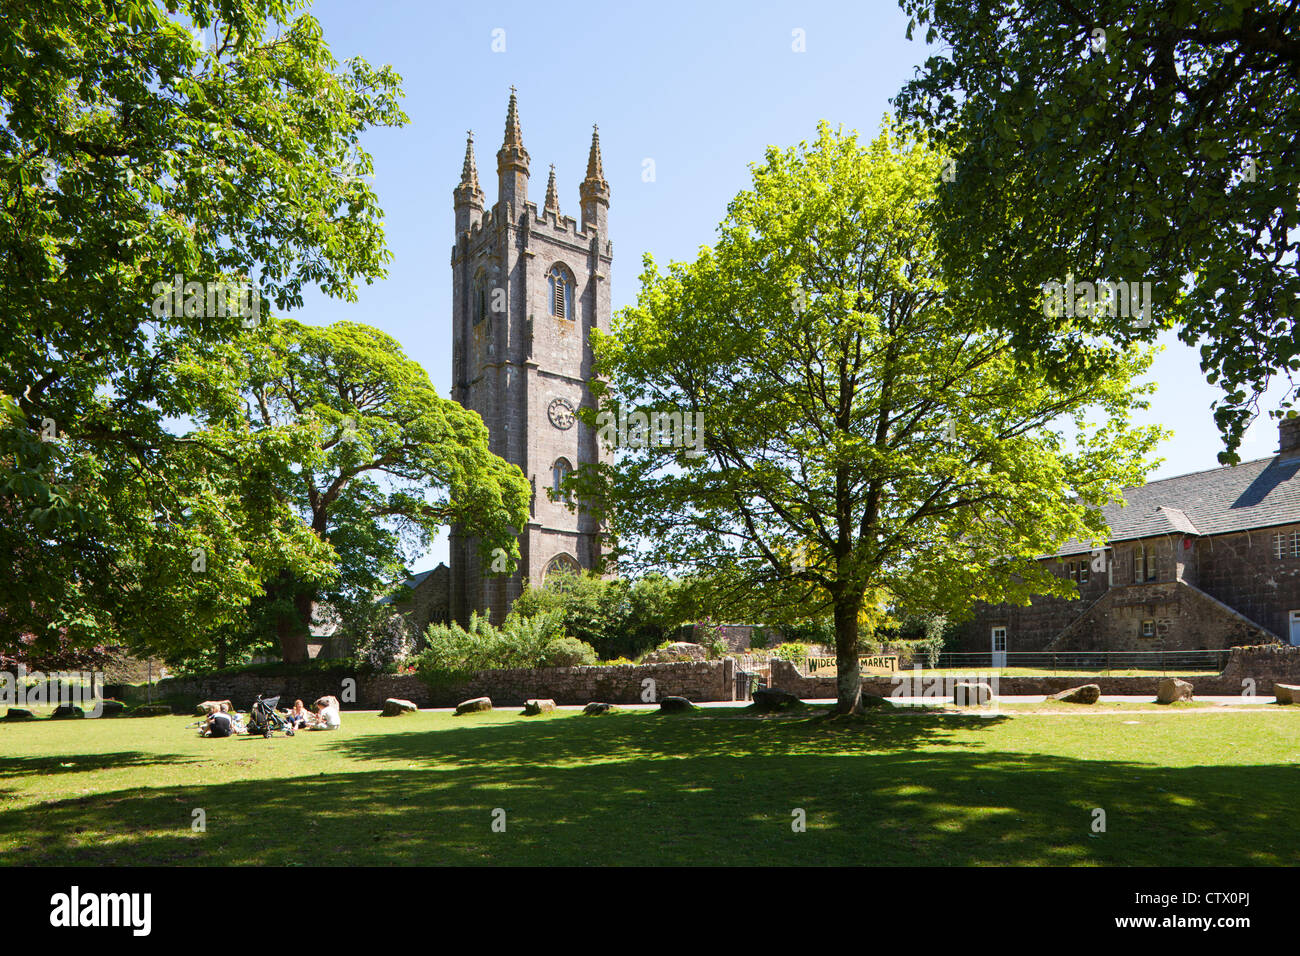 The village green at Widecombe in the Moor, Devon, UK. The village is immortalised in the folk song "Widecombe Fair". Stock Photo